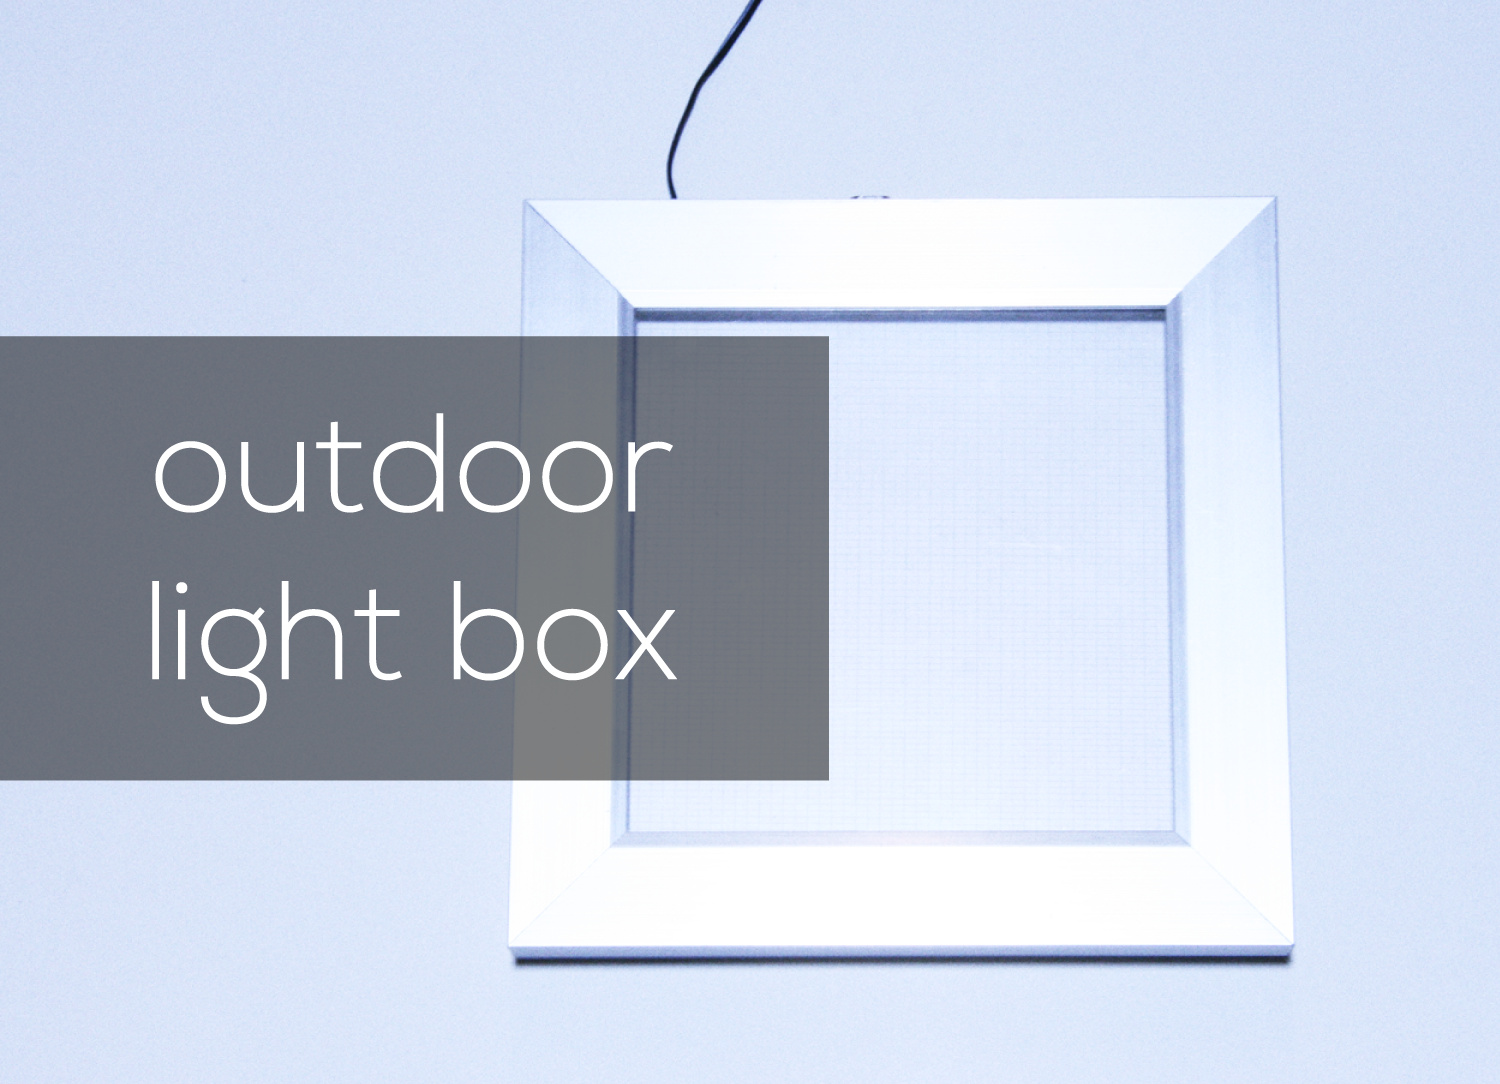 LED outdoor light box link